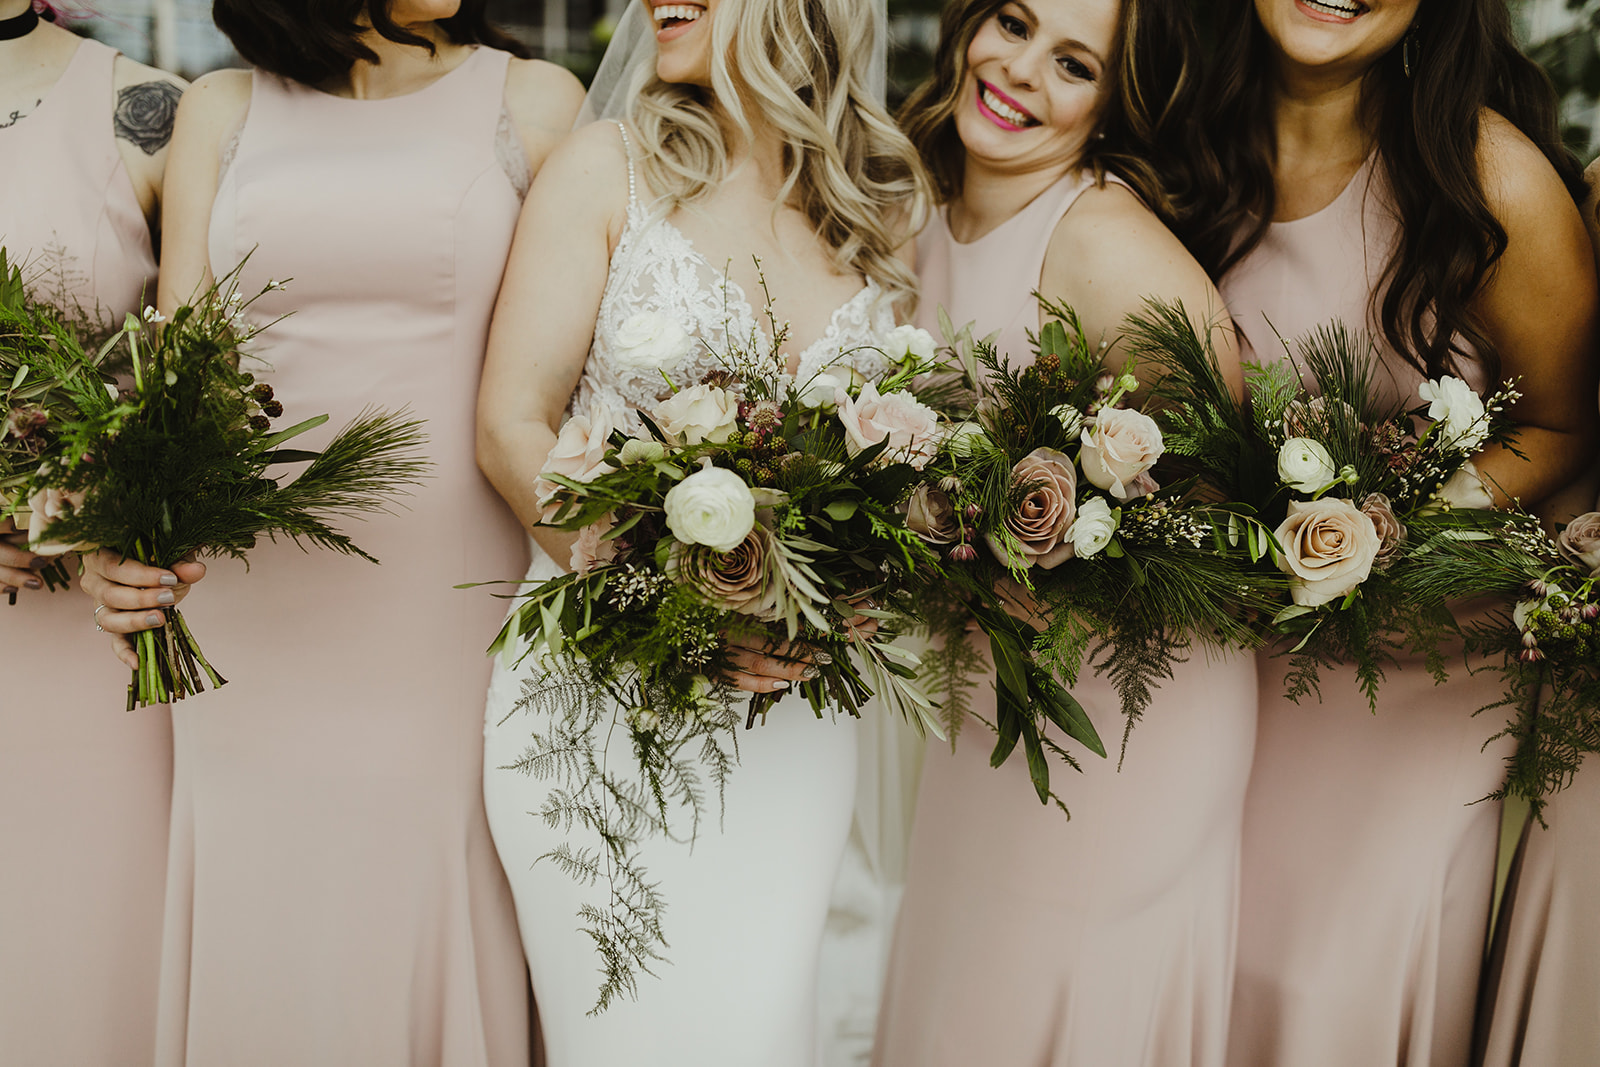 A bride and her bridesmaids smiling with their bouquets